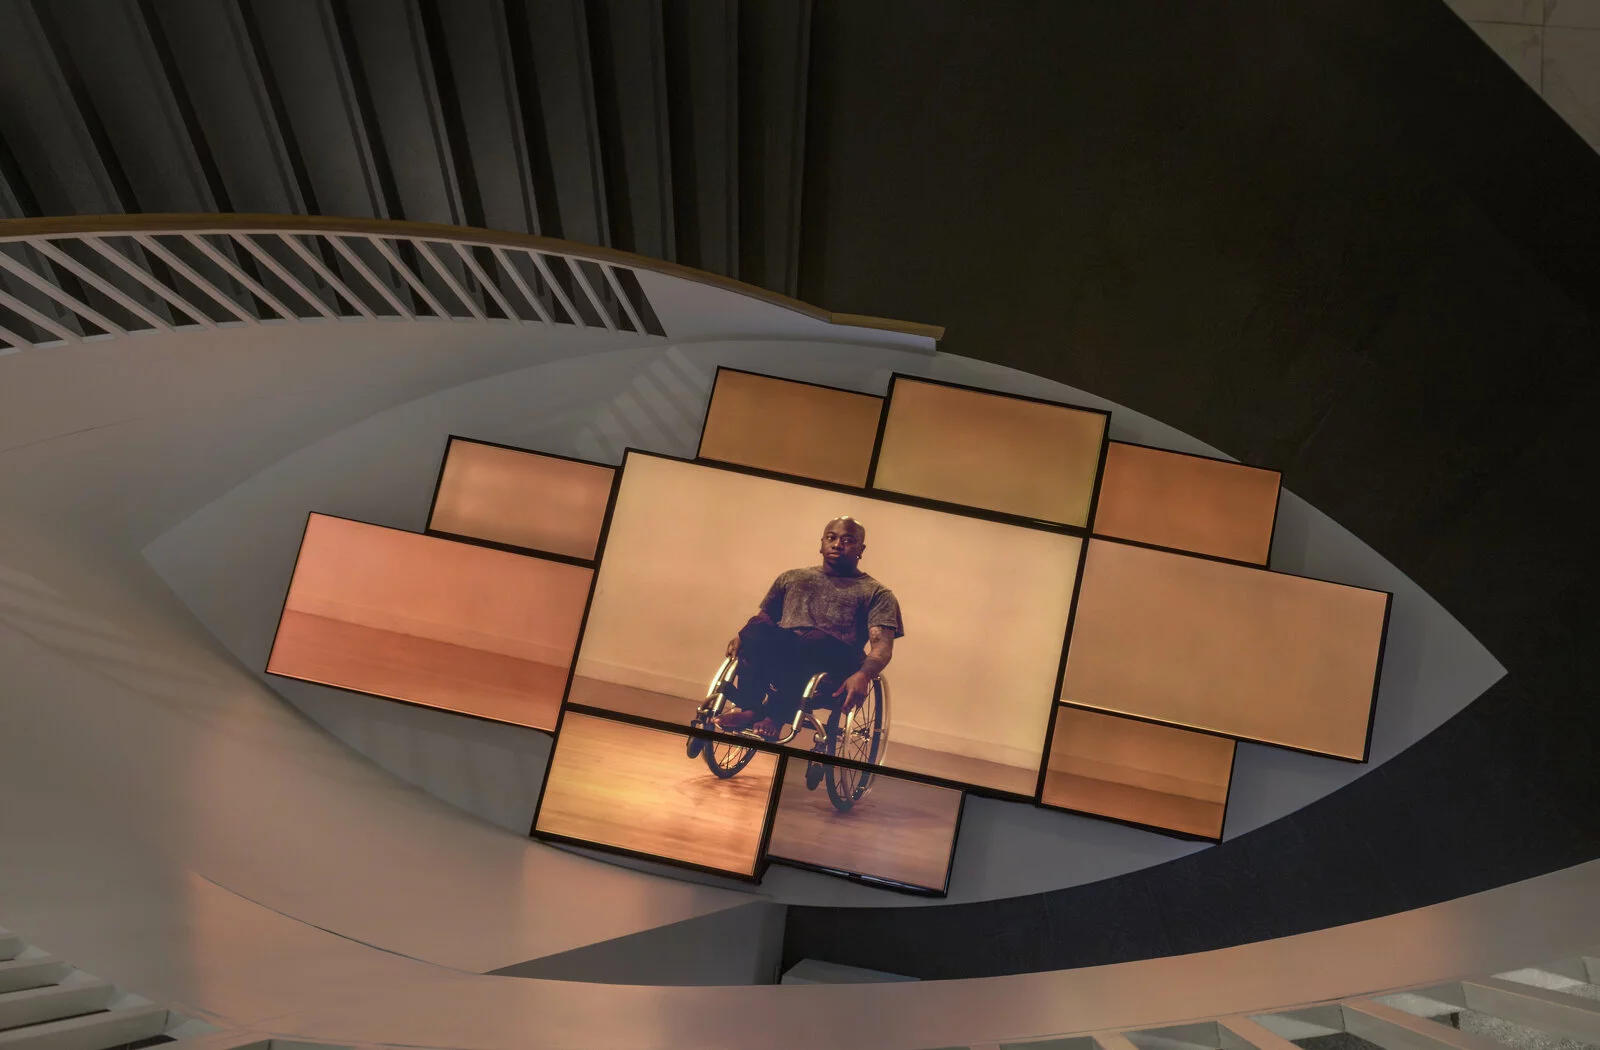 Ten TV screens of varying sizes arranged tightly together display a single image of a person who uses a wheelchair against a peach backdrop.